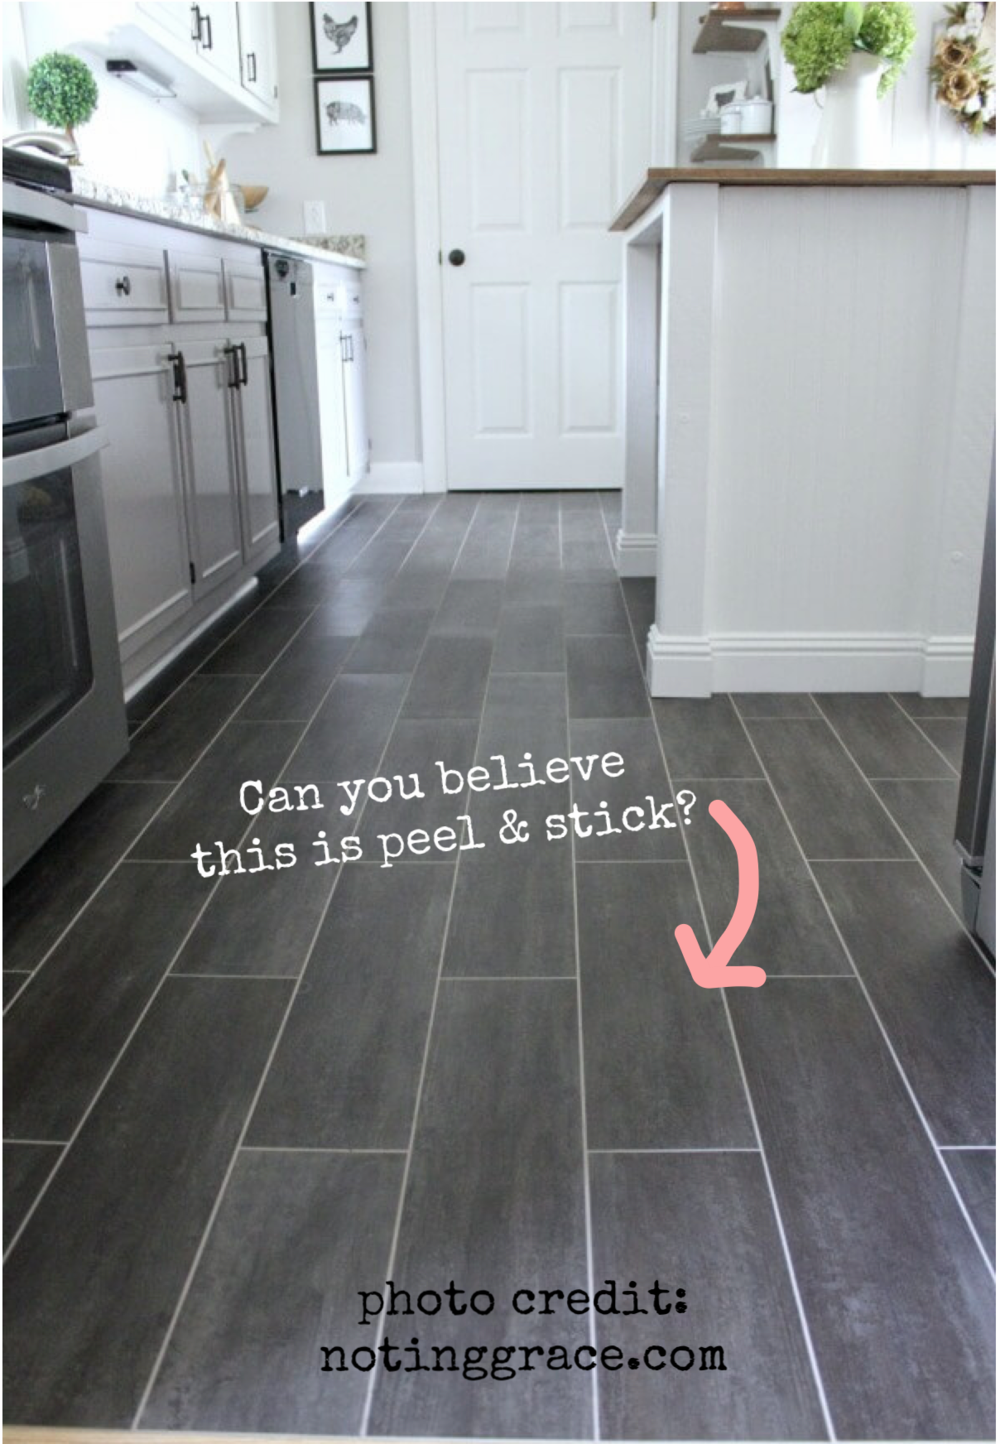 Ideas For Covering Up Tile Floors, What Flooring Can You Put Over Tiles